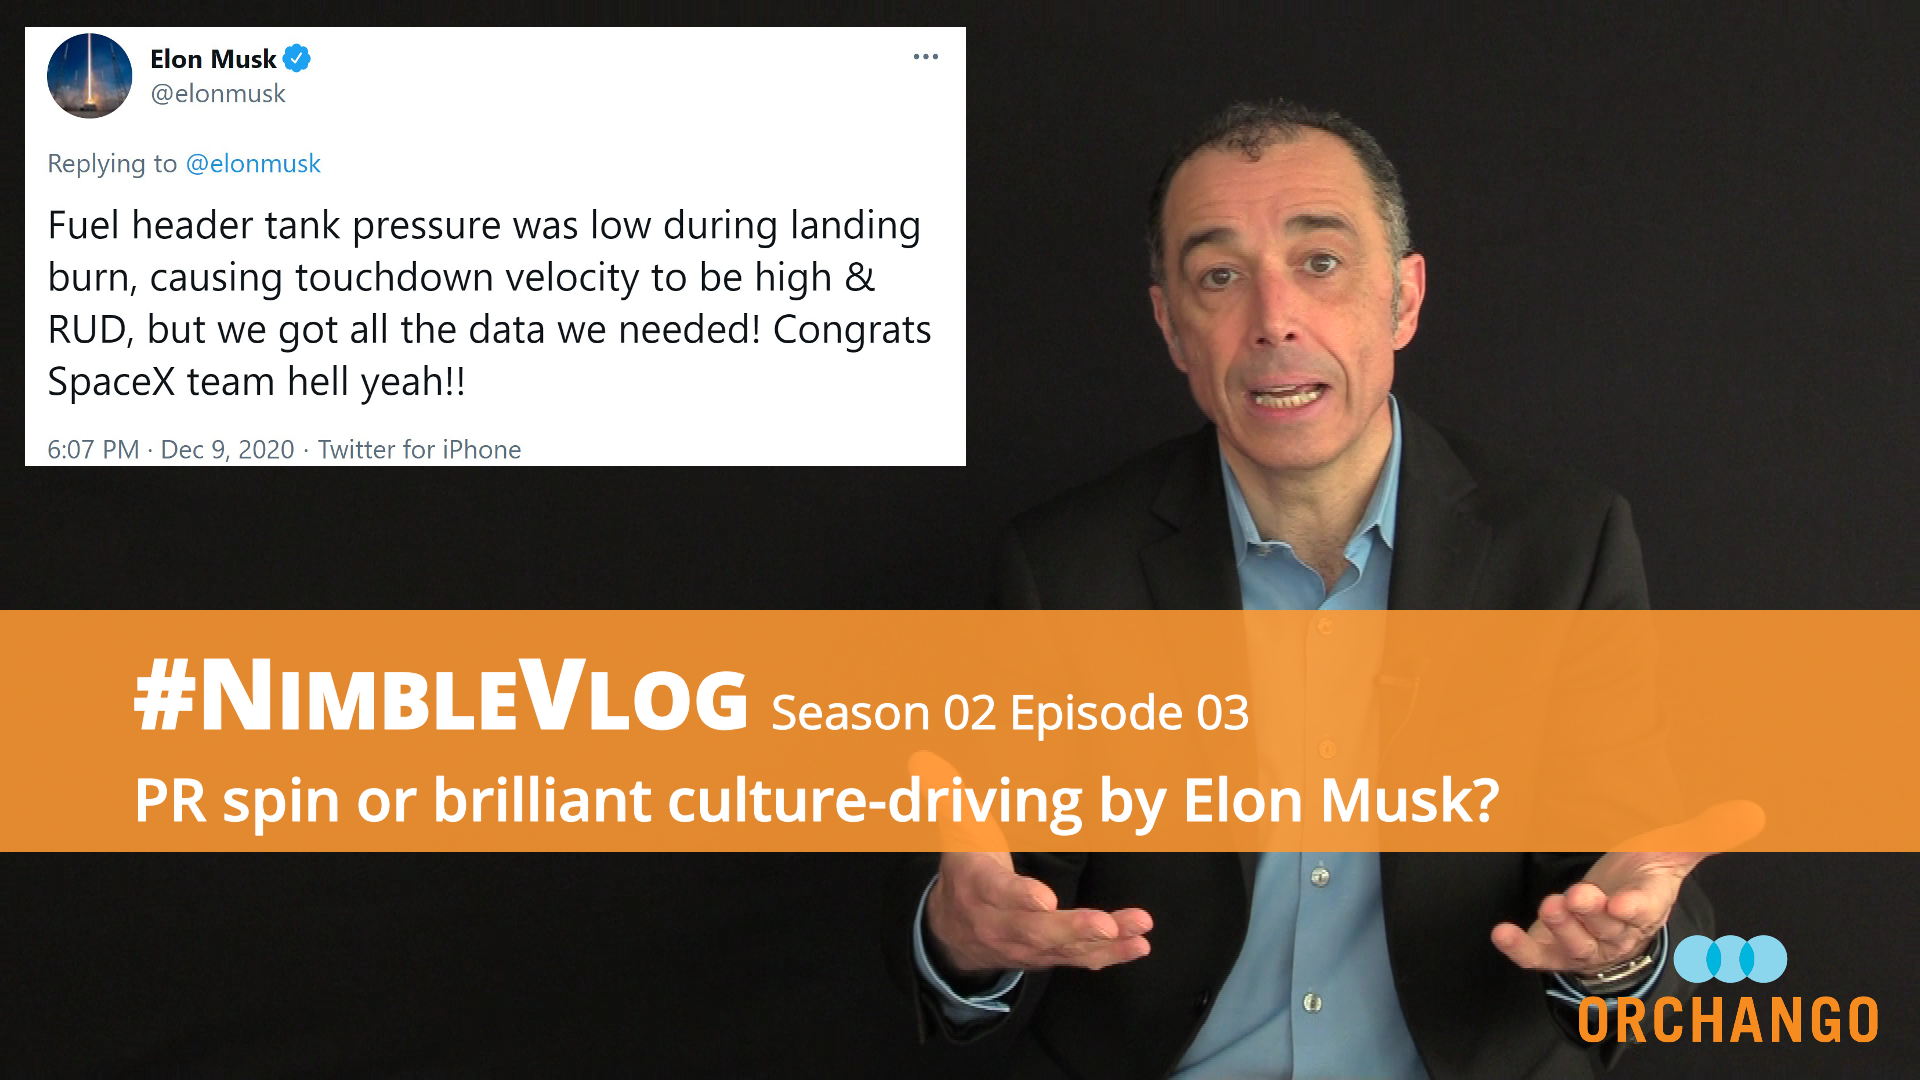 PR spin or brilliant culture-driving by Elon Musk?